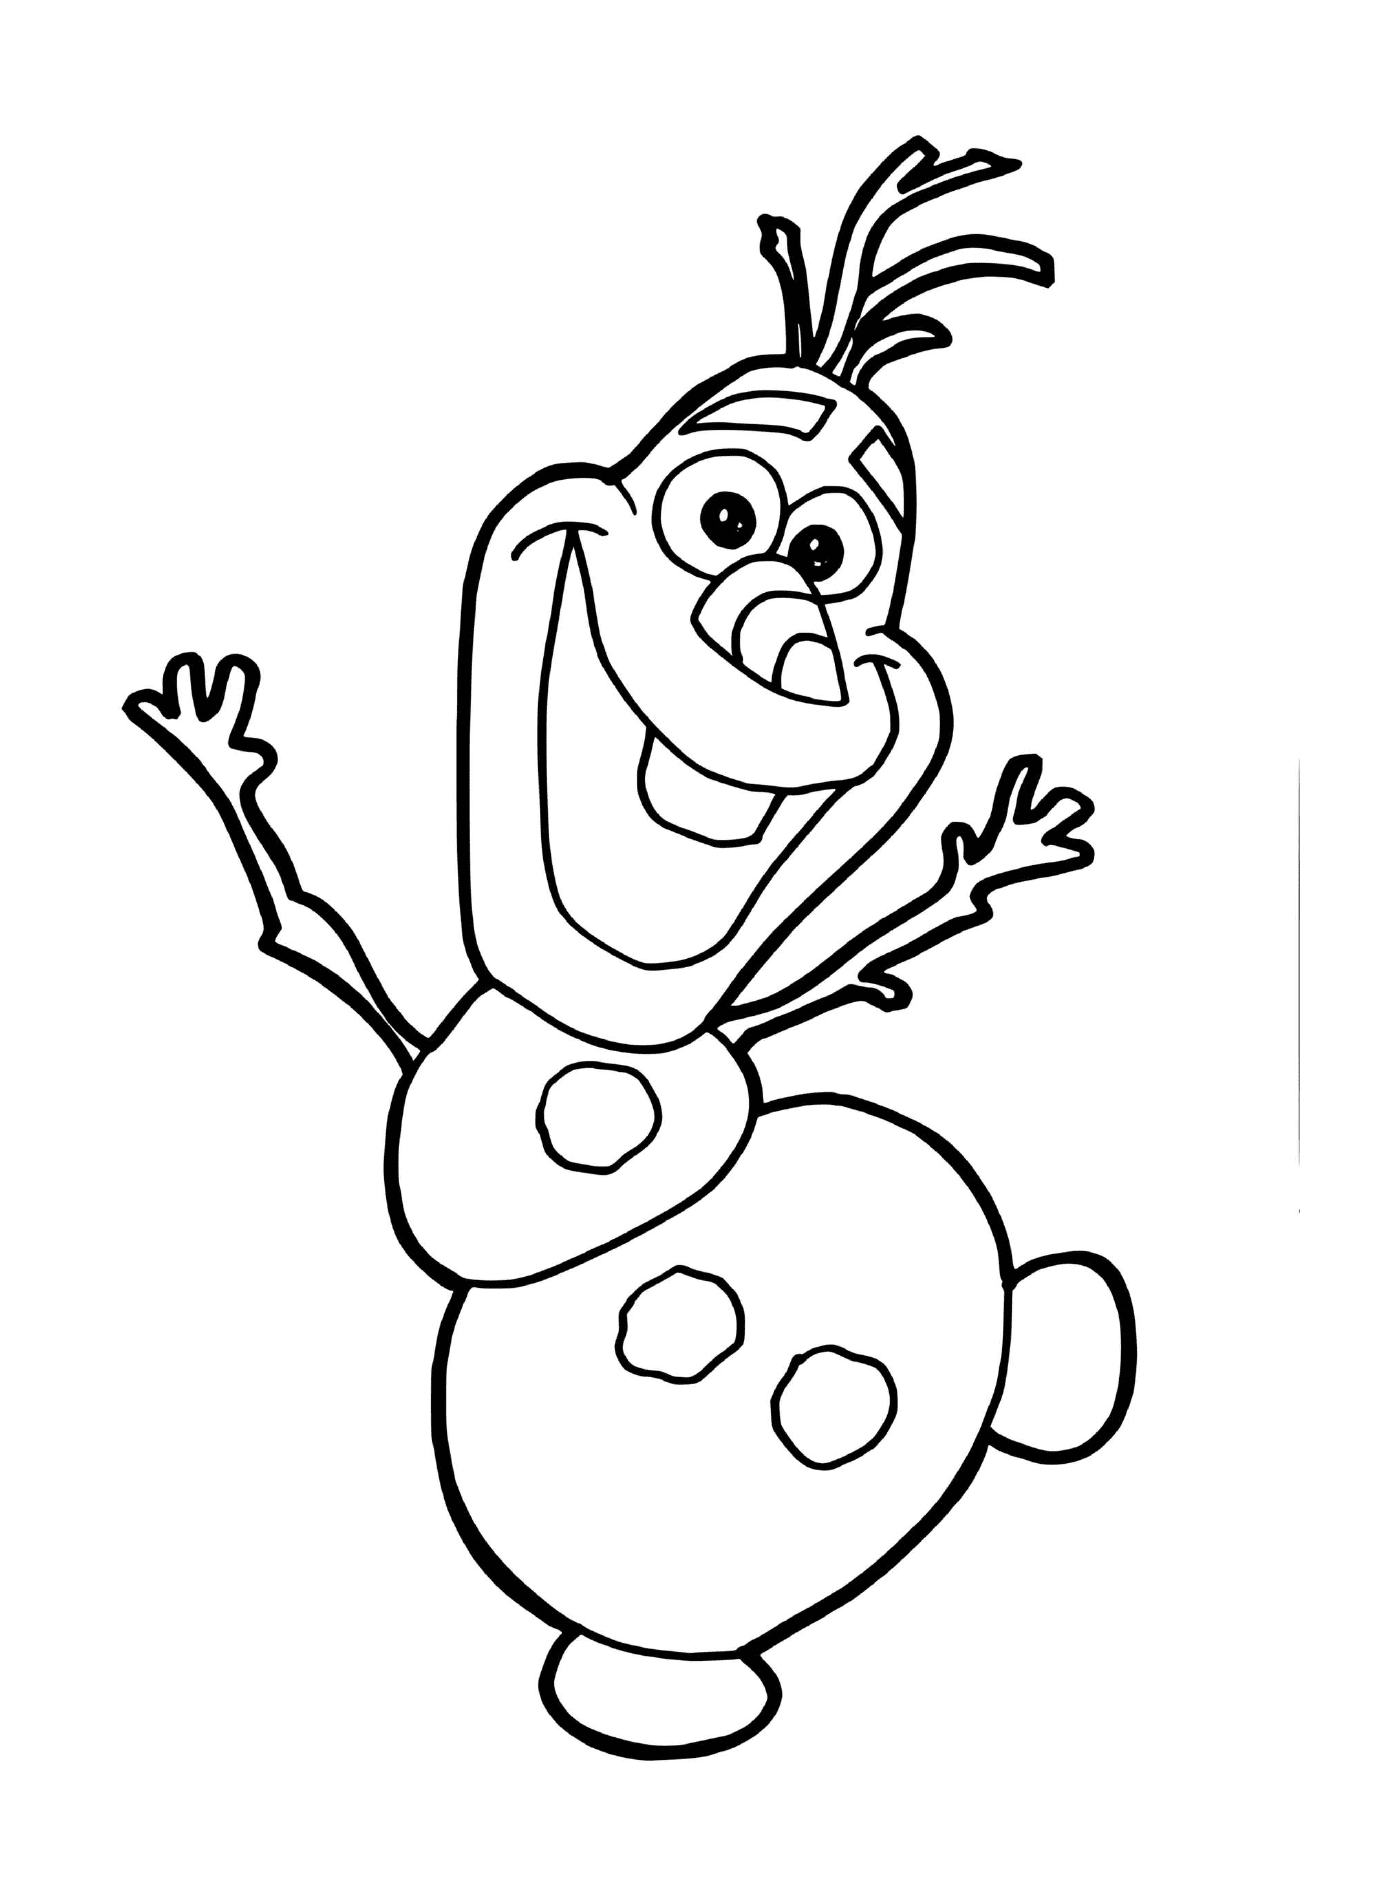  Olaf, the snowman of The Snow Queen 